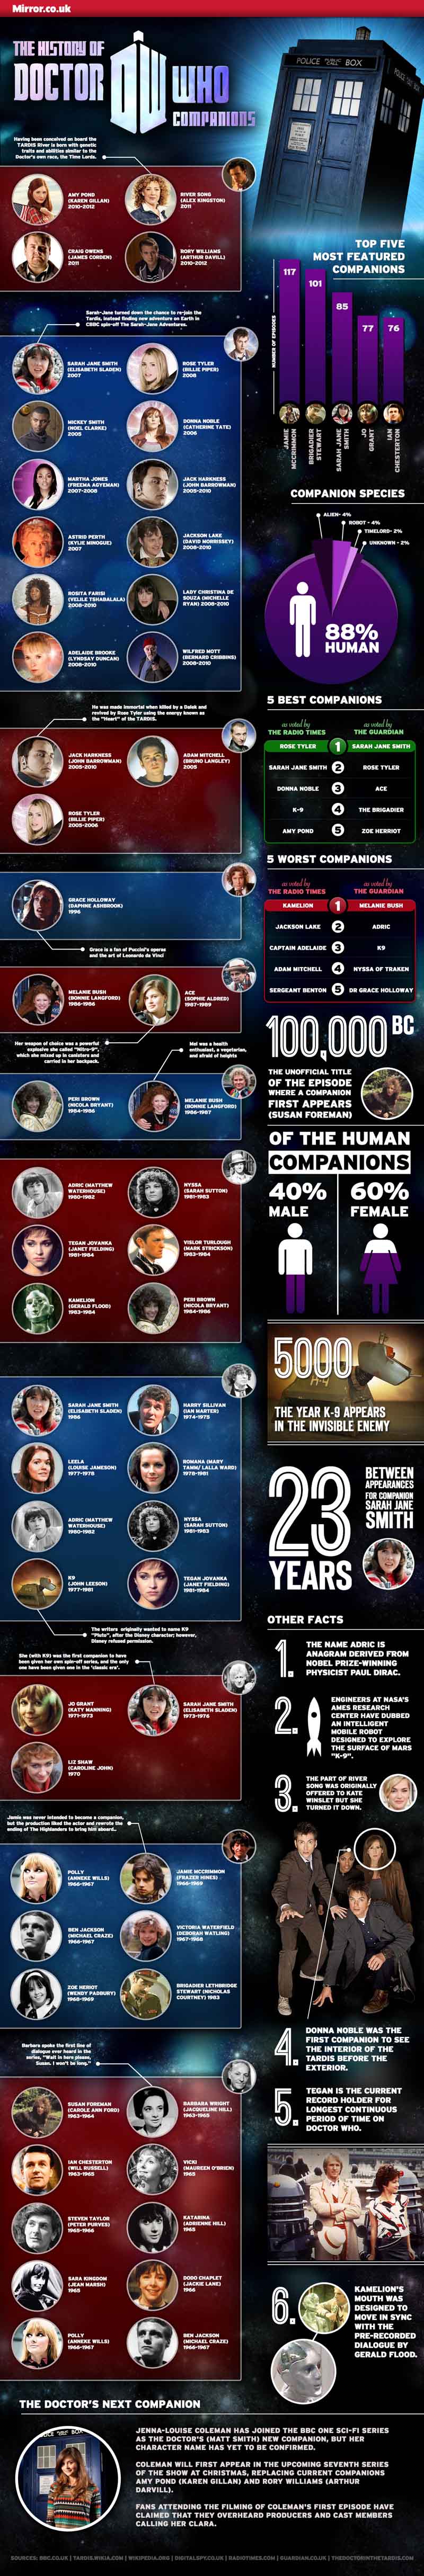 The History of Doctor Who